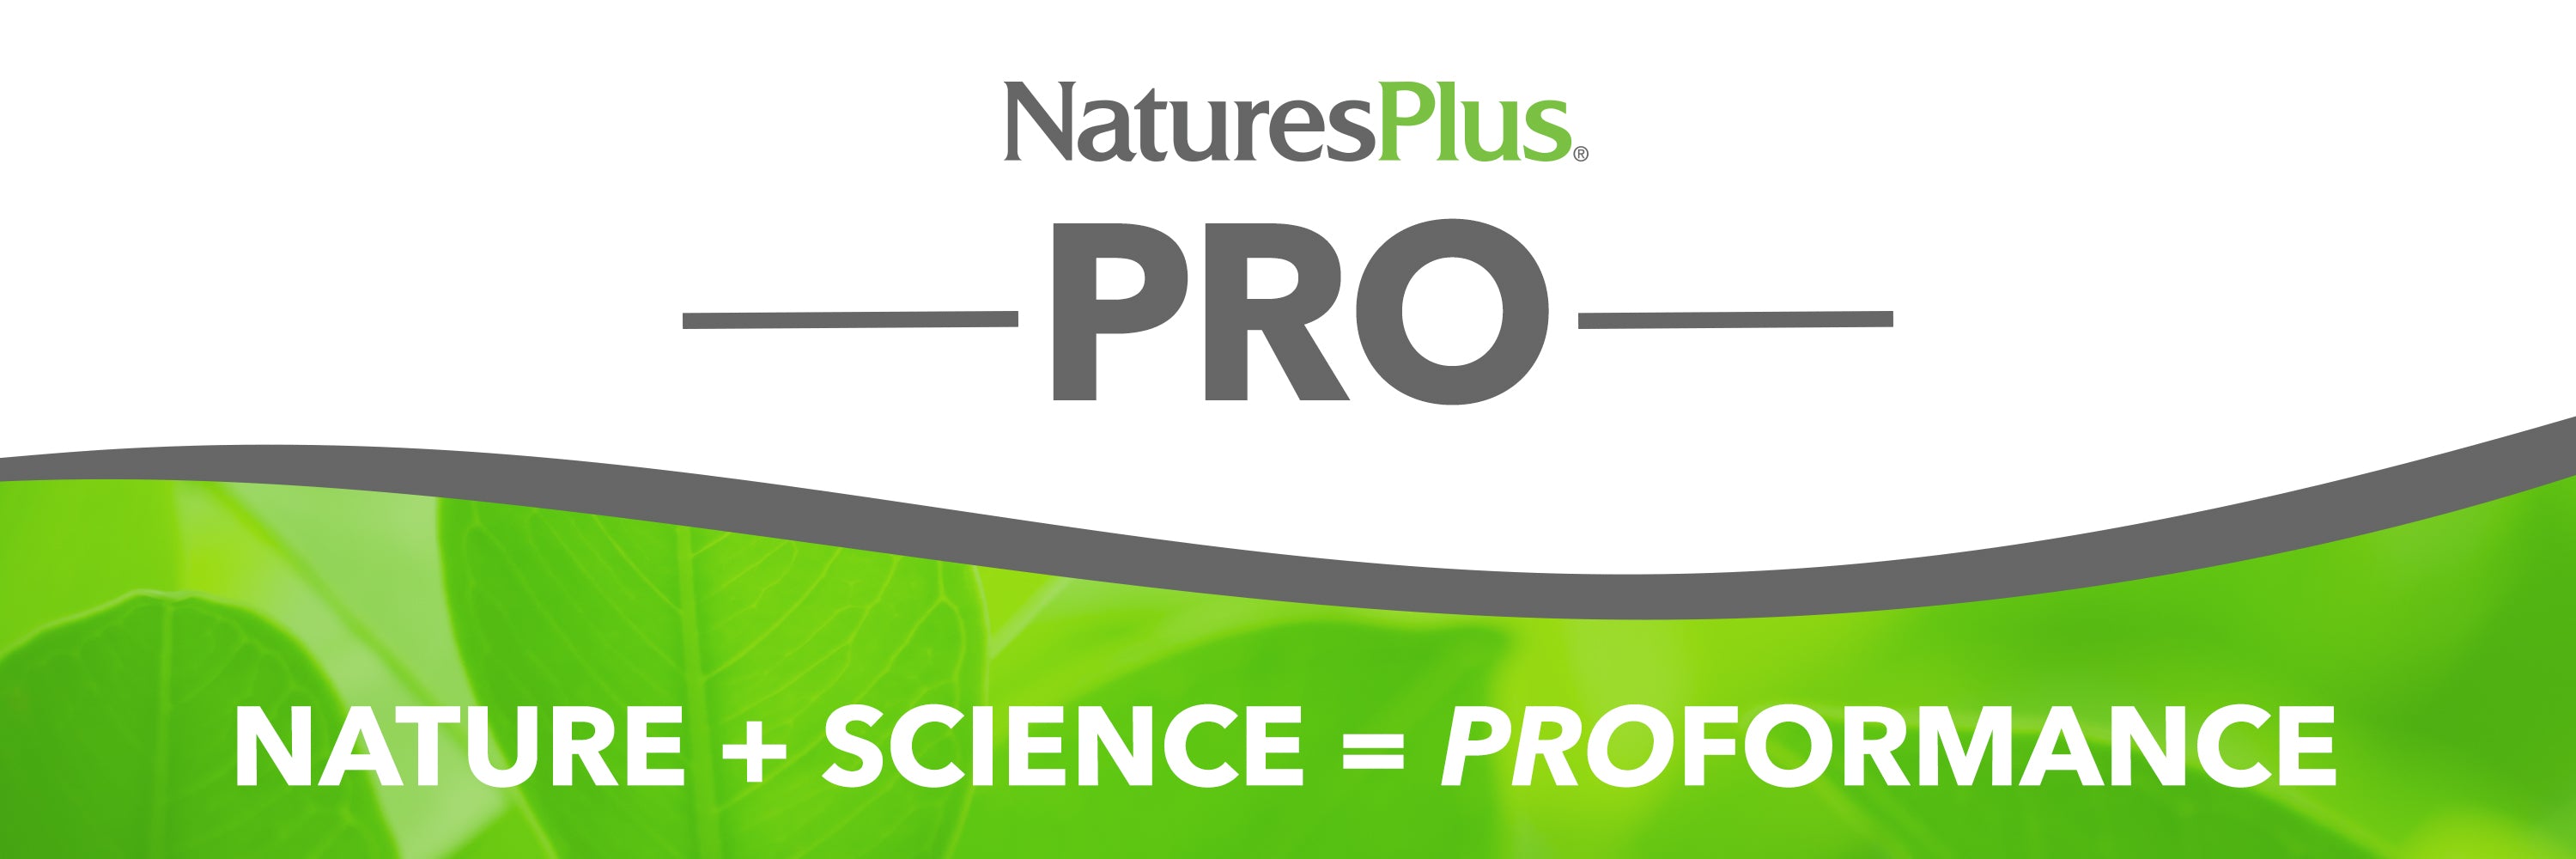 NaturesPlus Pro collection image banner